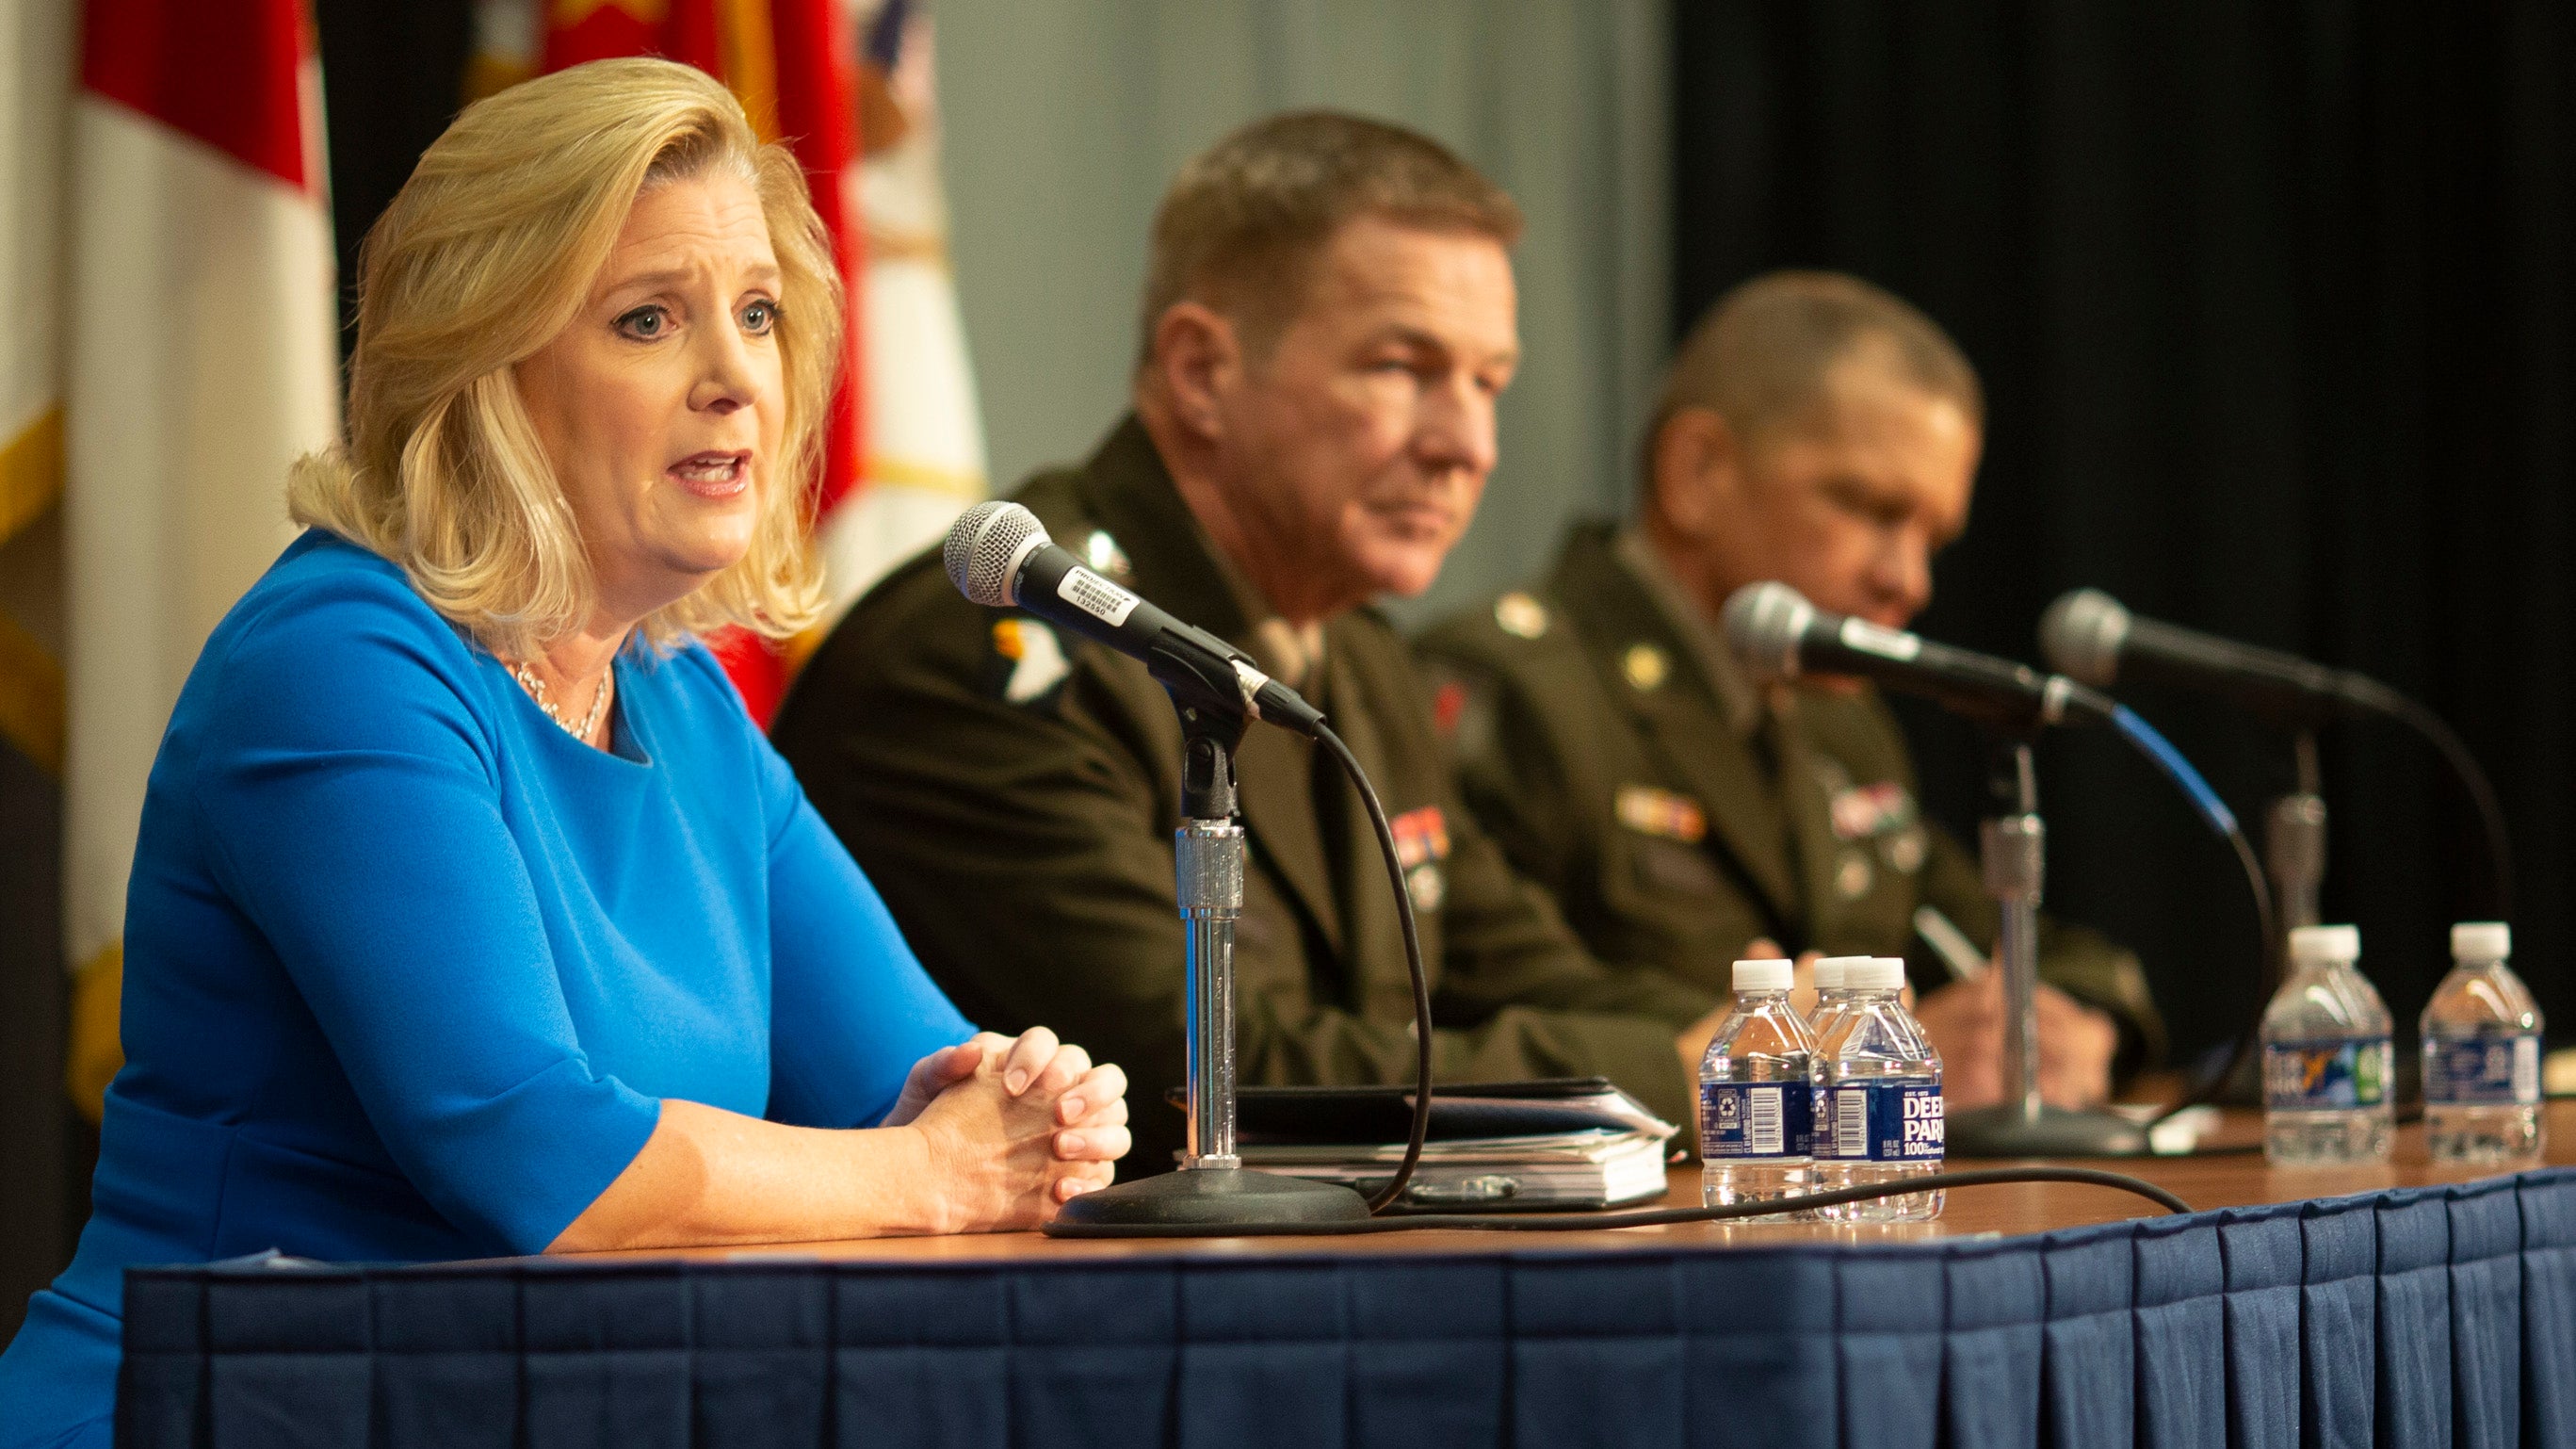 Secretary of the Army Christine Wormuth, Chief of Staff of the Army Gen. James McConville and Sergeant Major of the Army Michael Grinston take questions during a press conference at AUSA 2022 Annual Meeting in Washington, D.C., Monday, Oct. 10, 2022. (Mike Morones for AUSA)